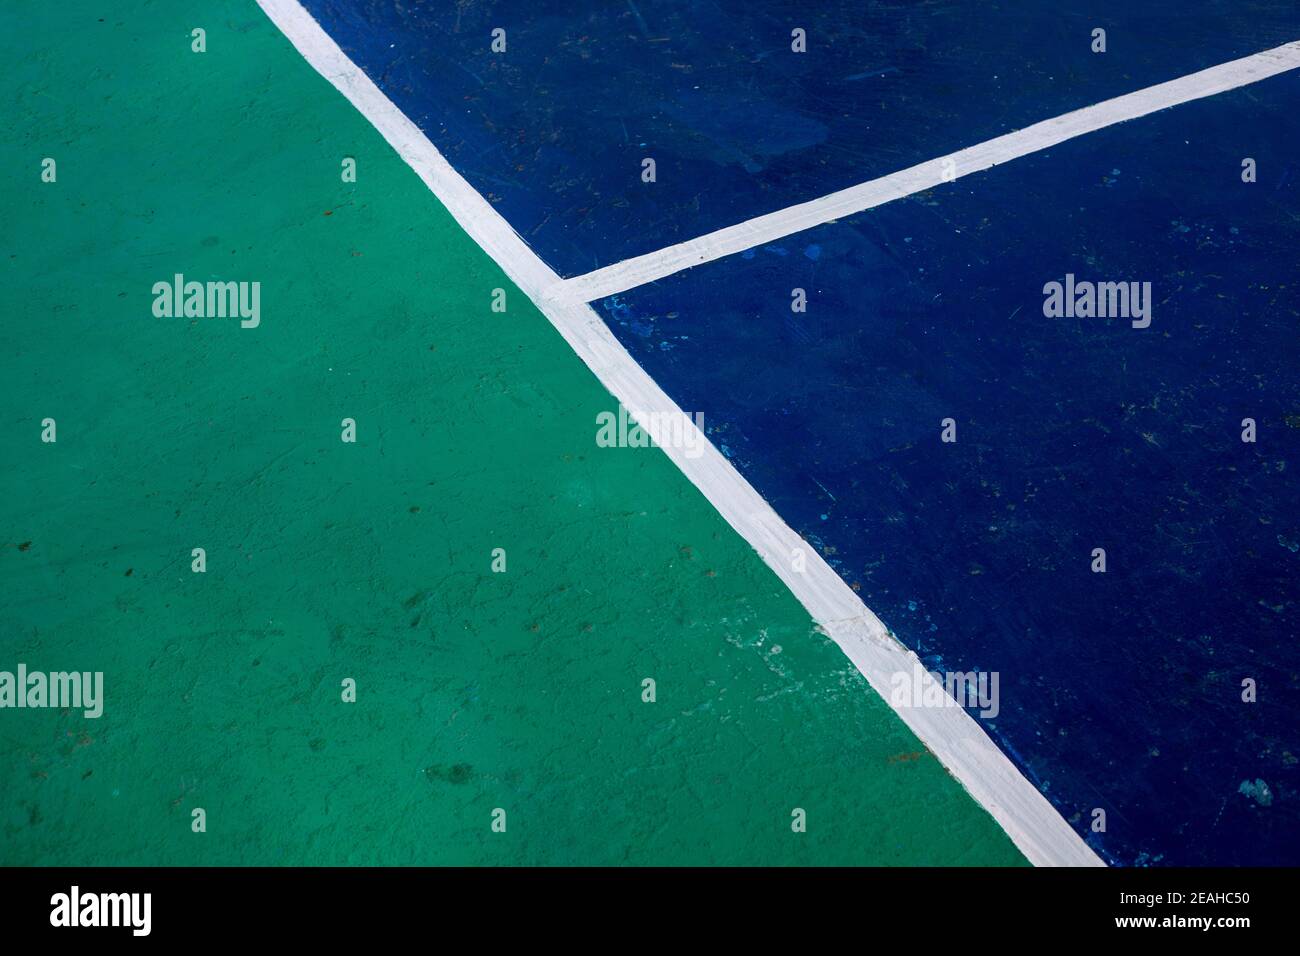 Sport field with color blocks and white line marks, perspective view photo. Tennis court cover in green and blue colors. Business competition concept. Stock Photo